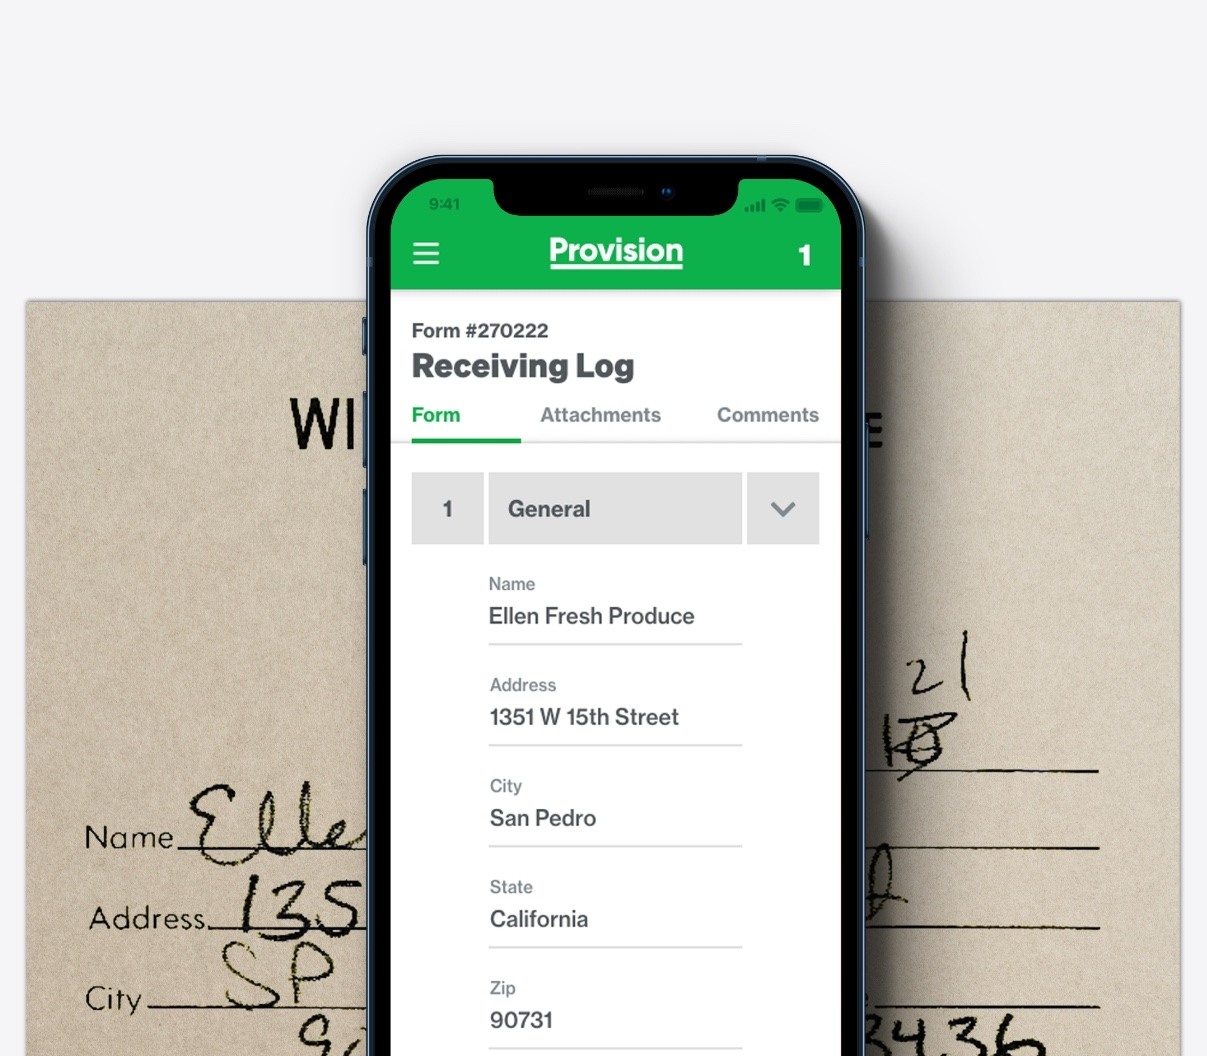 Provision App Receiving Log on the Mobile